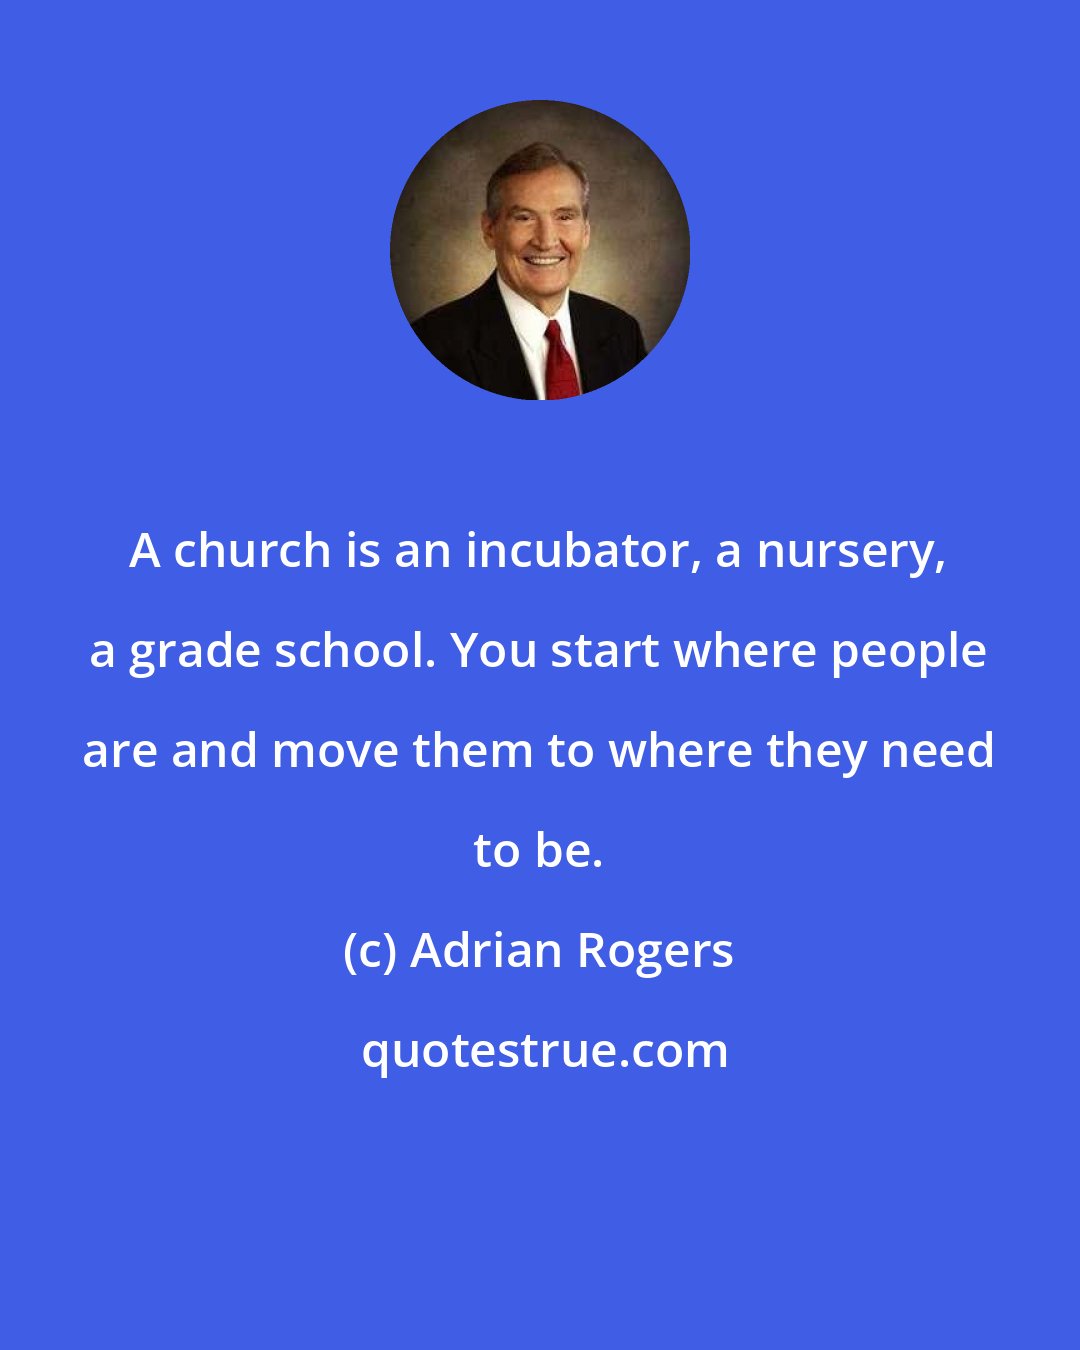 Adrian Rogers: A church is an incubator, a nursery, a grade school. You start where people are and move them to where they need to be.